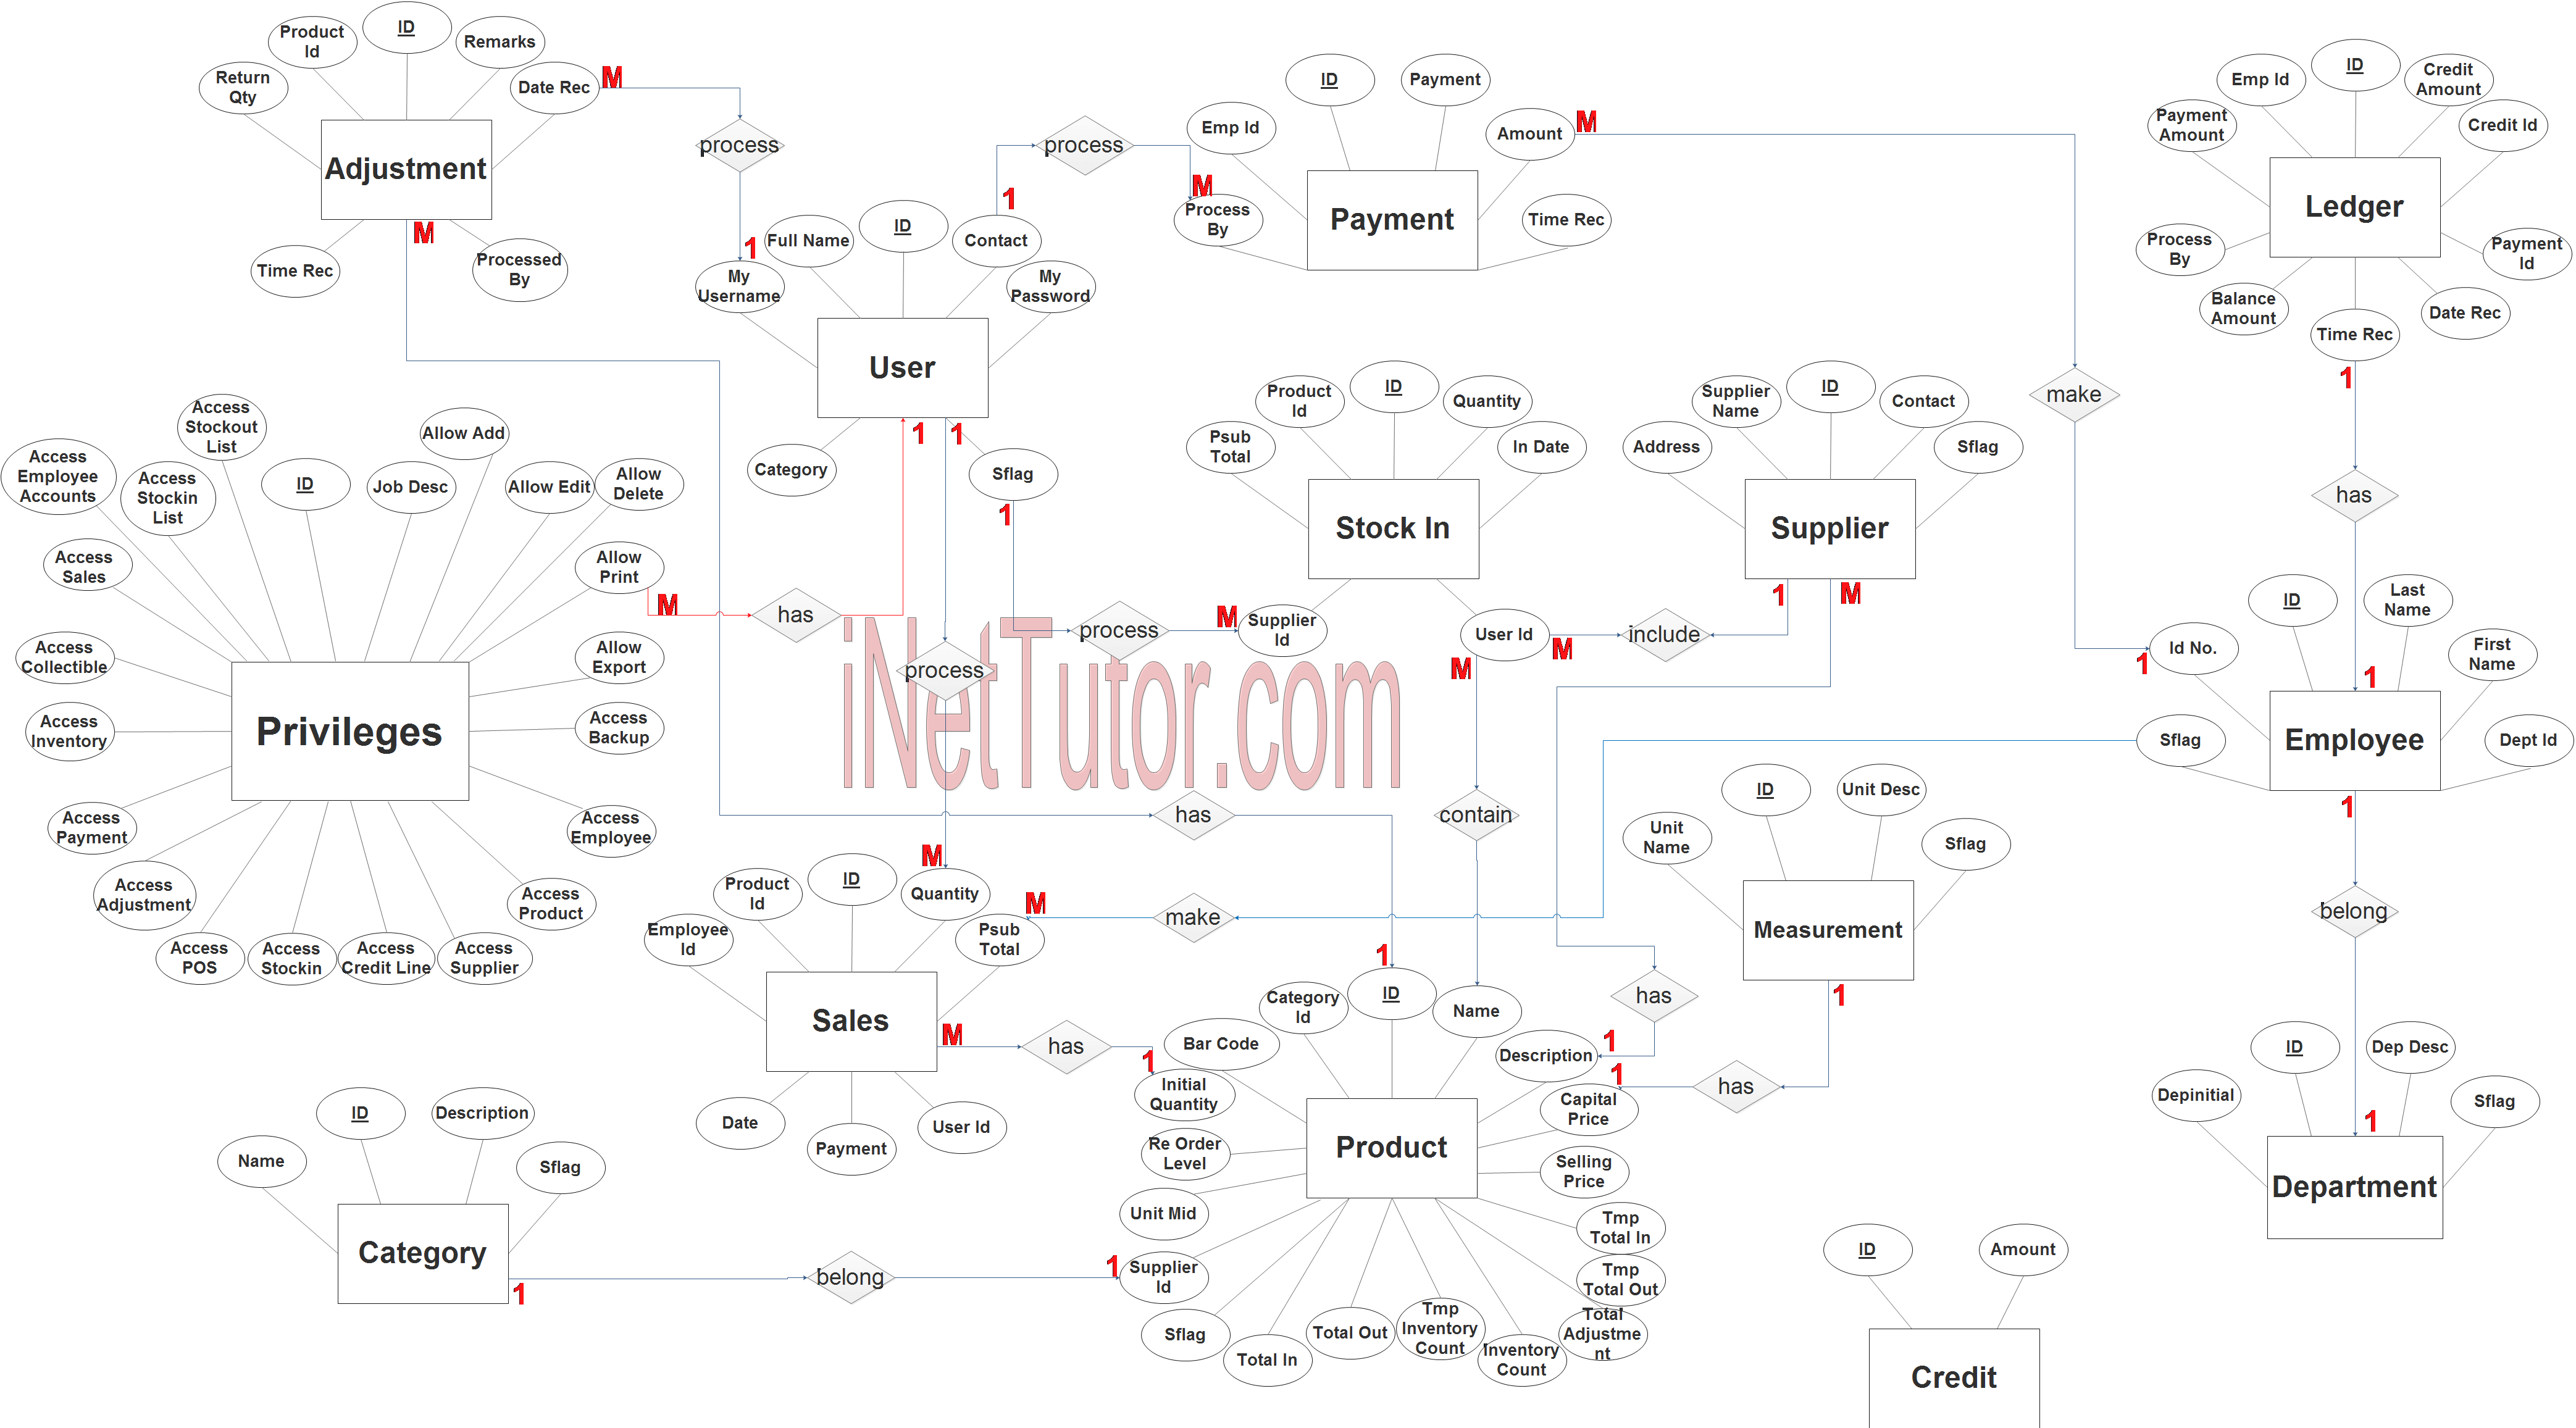 Canteen Sales And Credit Management System ER Diagram INetTutor